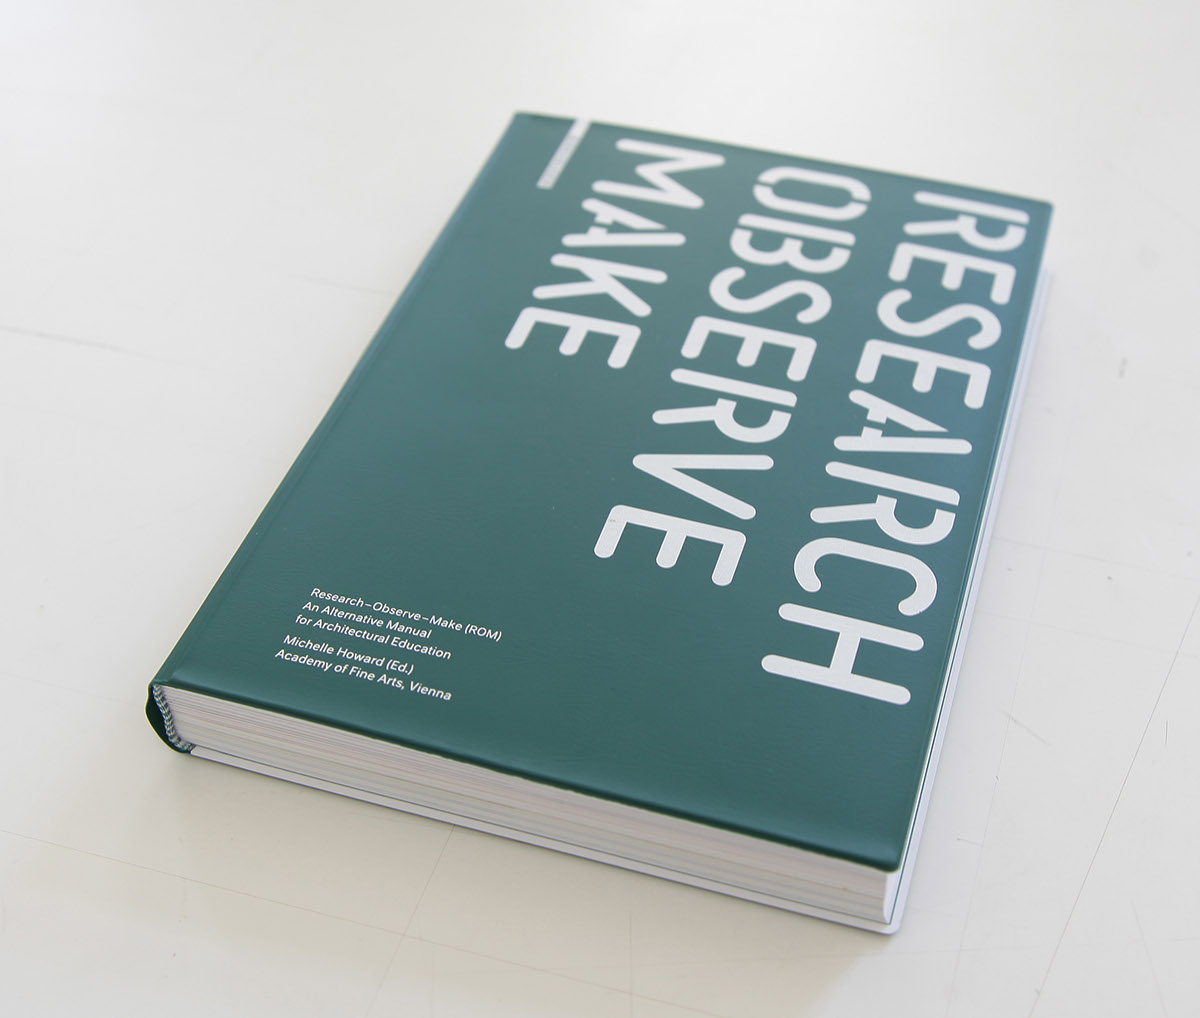 Research - Observe – Make An Alternative Manual for Architectural Education